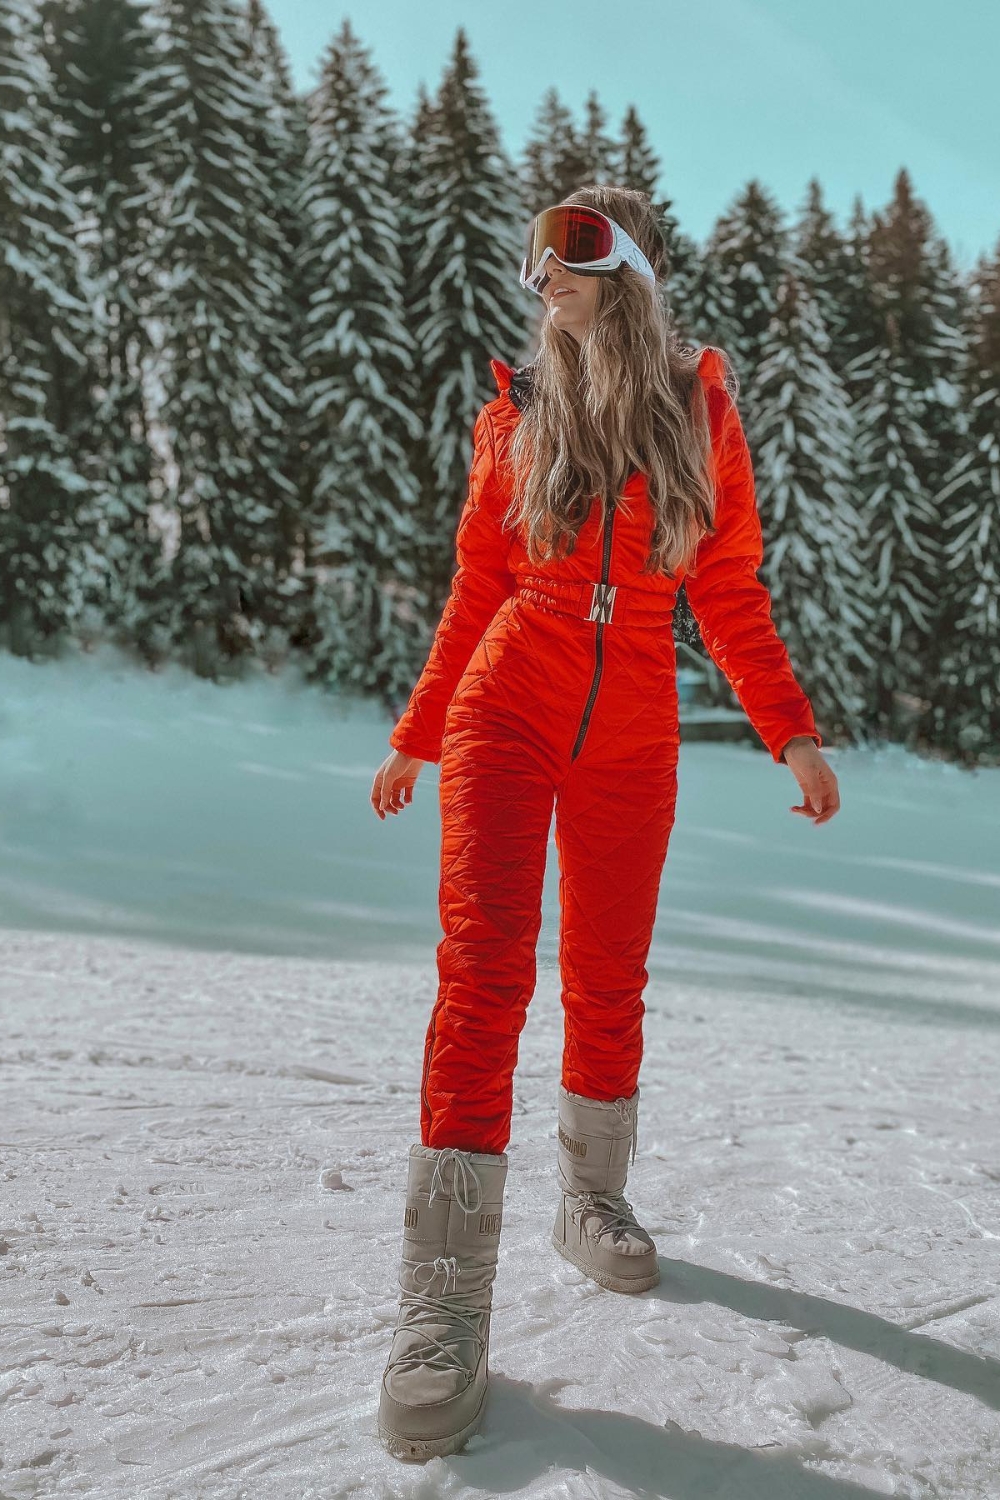 Black and White Ski Suit - red Ski Suit With Snow Boots